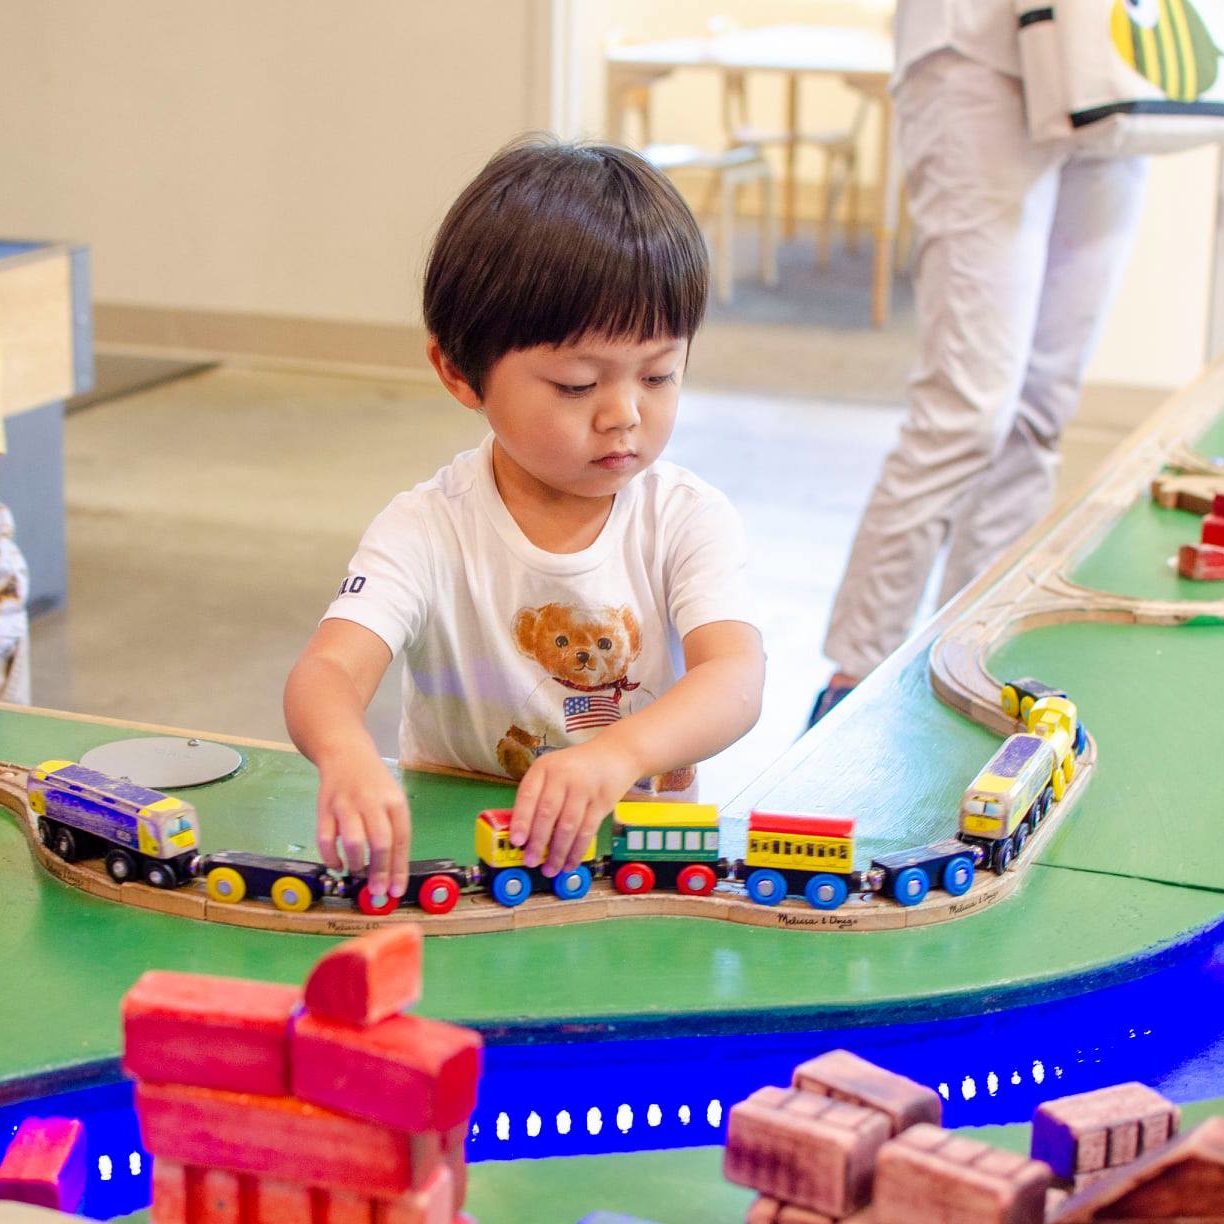 A boy is shown playing with a train on our train table